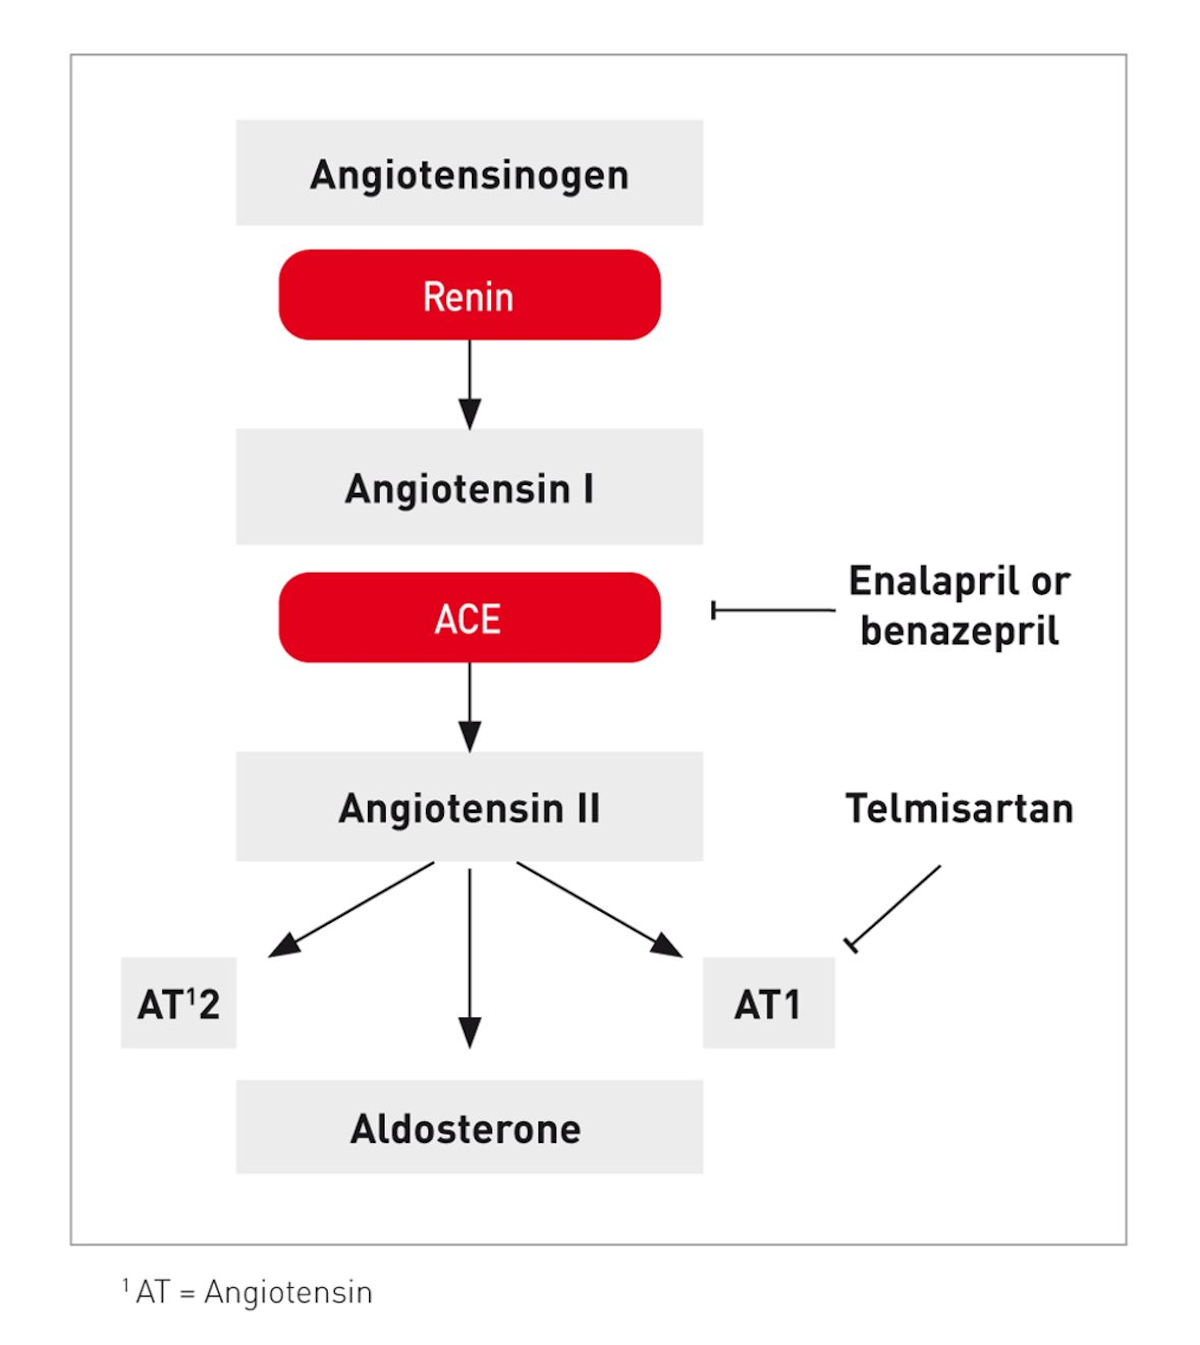 The renin-angiotensin-aldosterone system and the sites of action for the most commonly used inhibitors in cats.